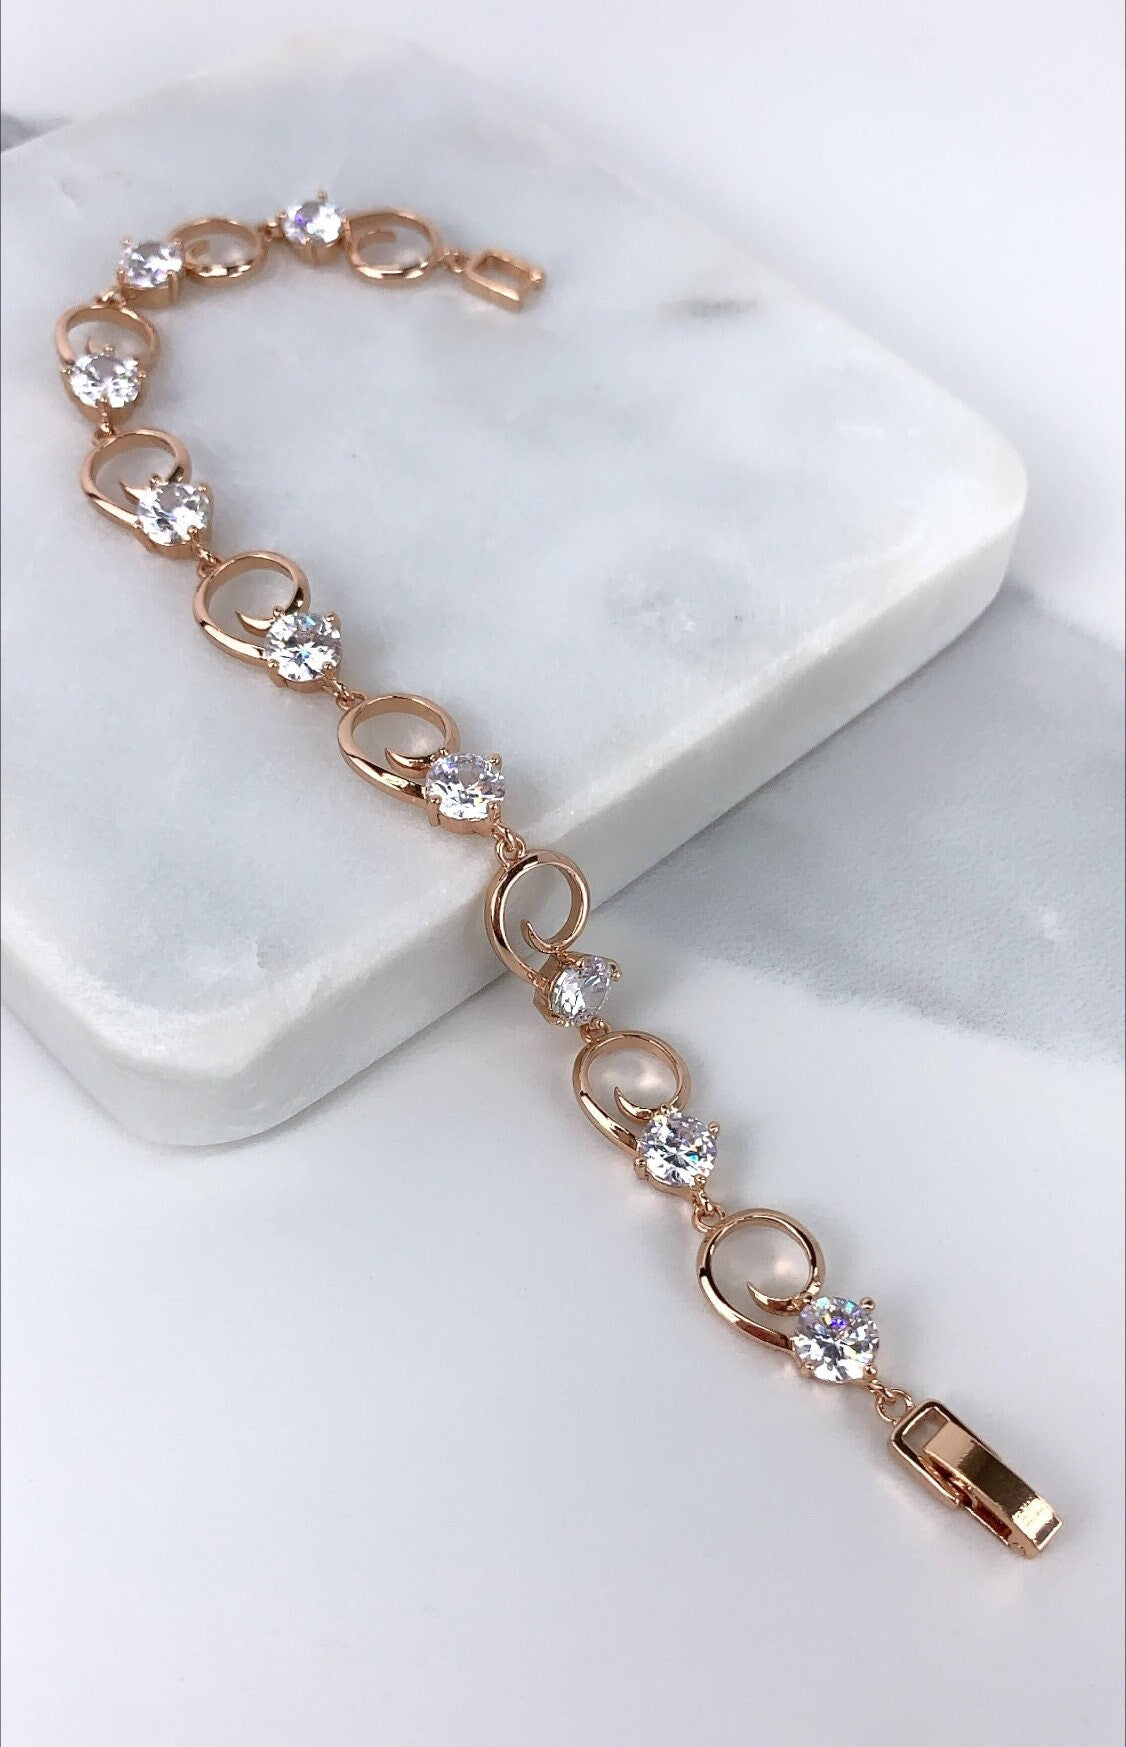 18k Rose Gold Filled with Zirconia Bracelet Wholesale Jewelry Supplies